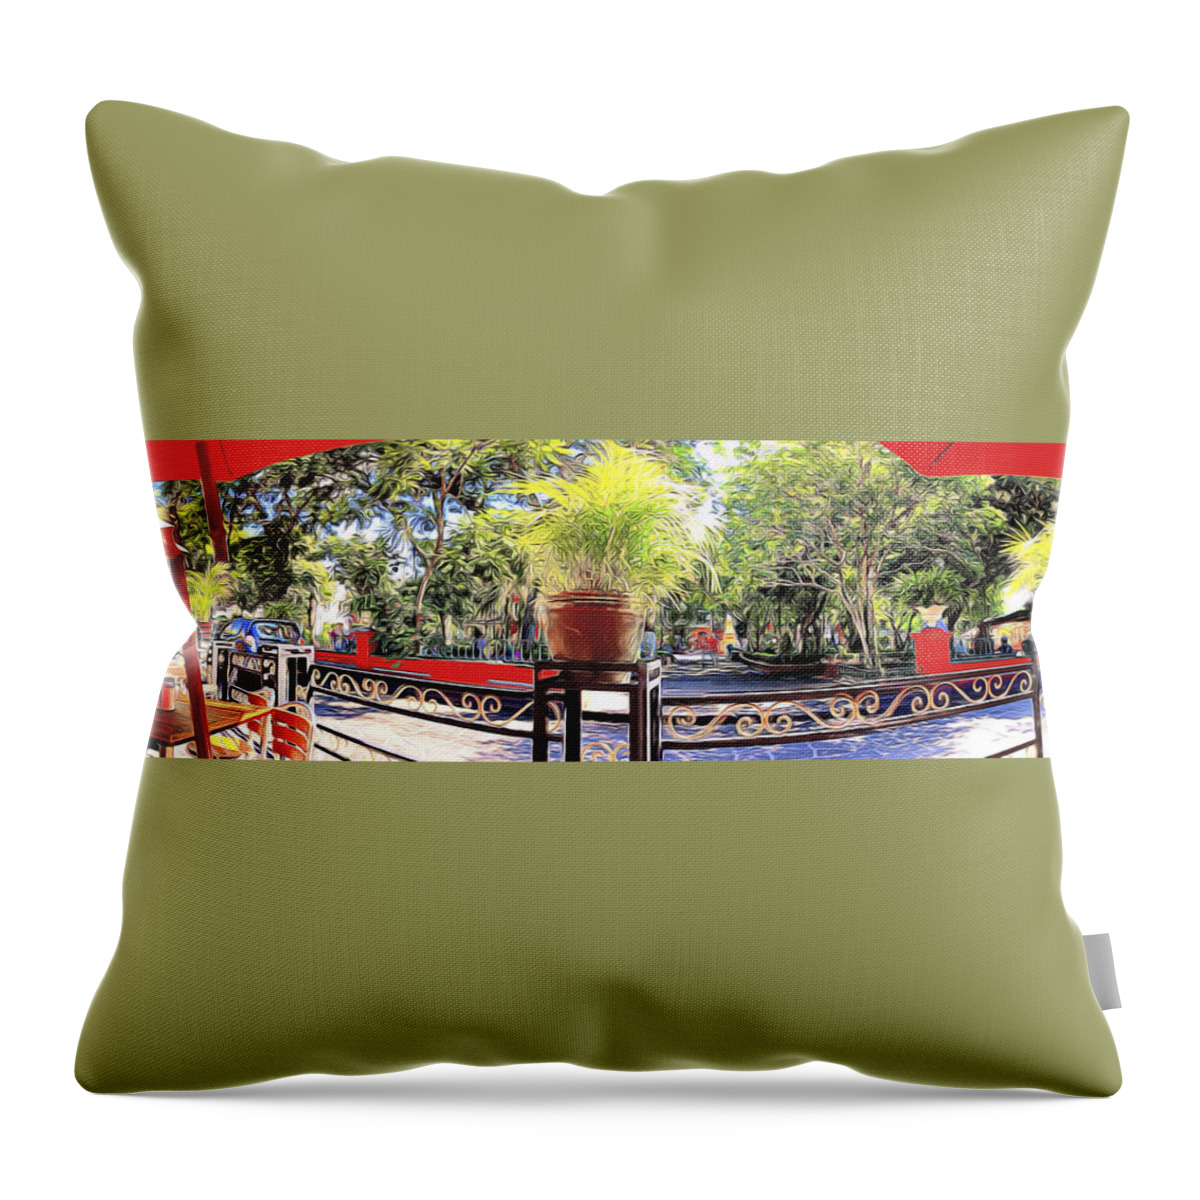 Culture Throw Pillow featuring the digital art Sidewalk Cafe 1 by William Horden